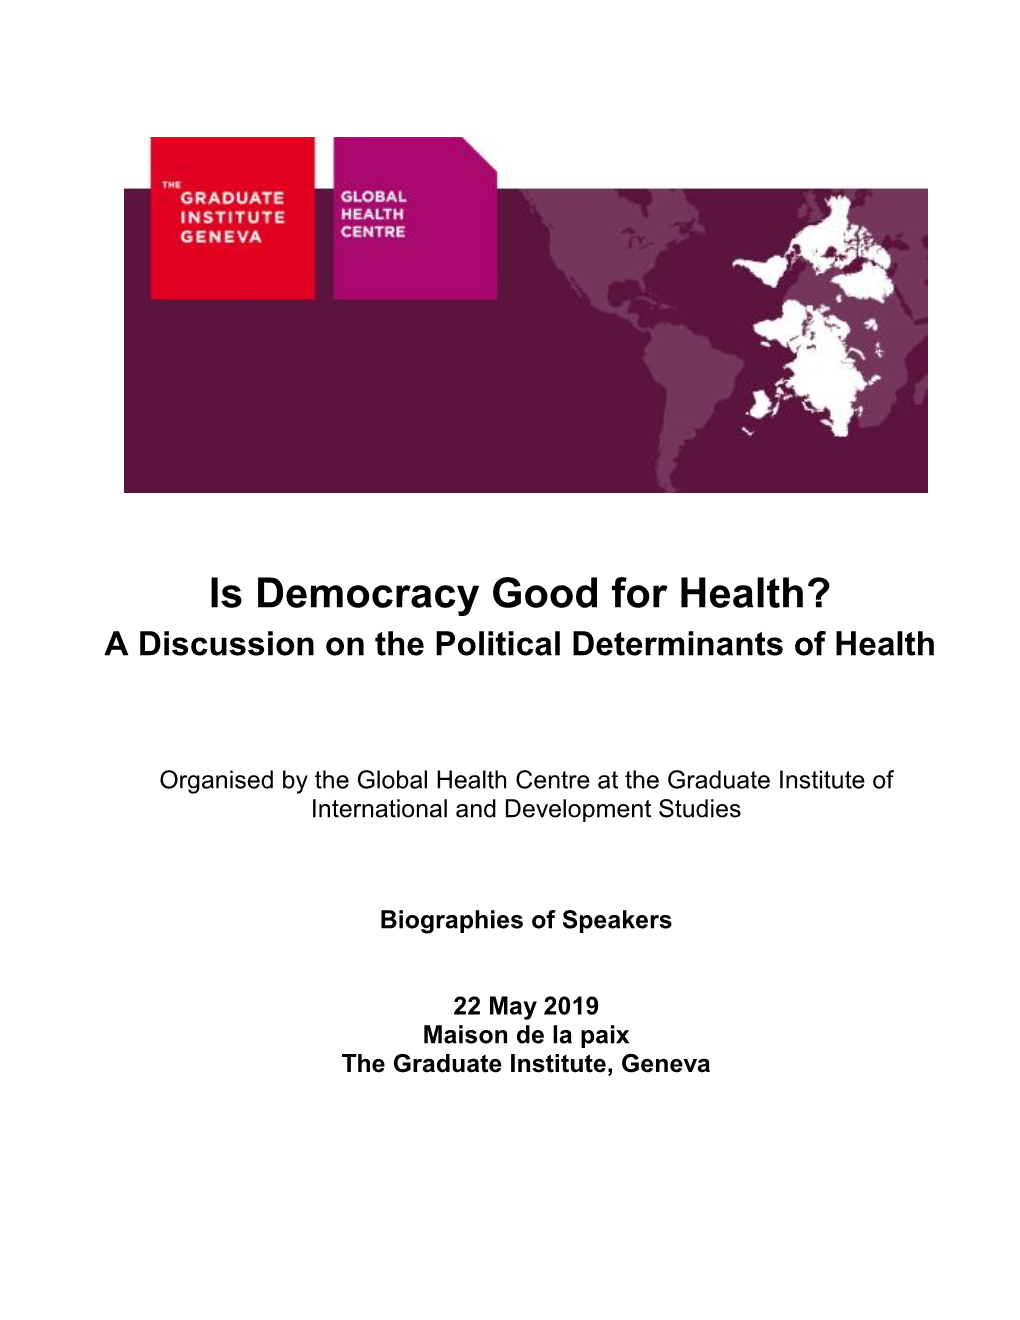 Is Democracy Good for Health? a Discussion on the Political Determinants of Health